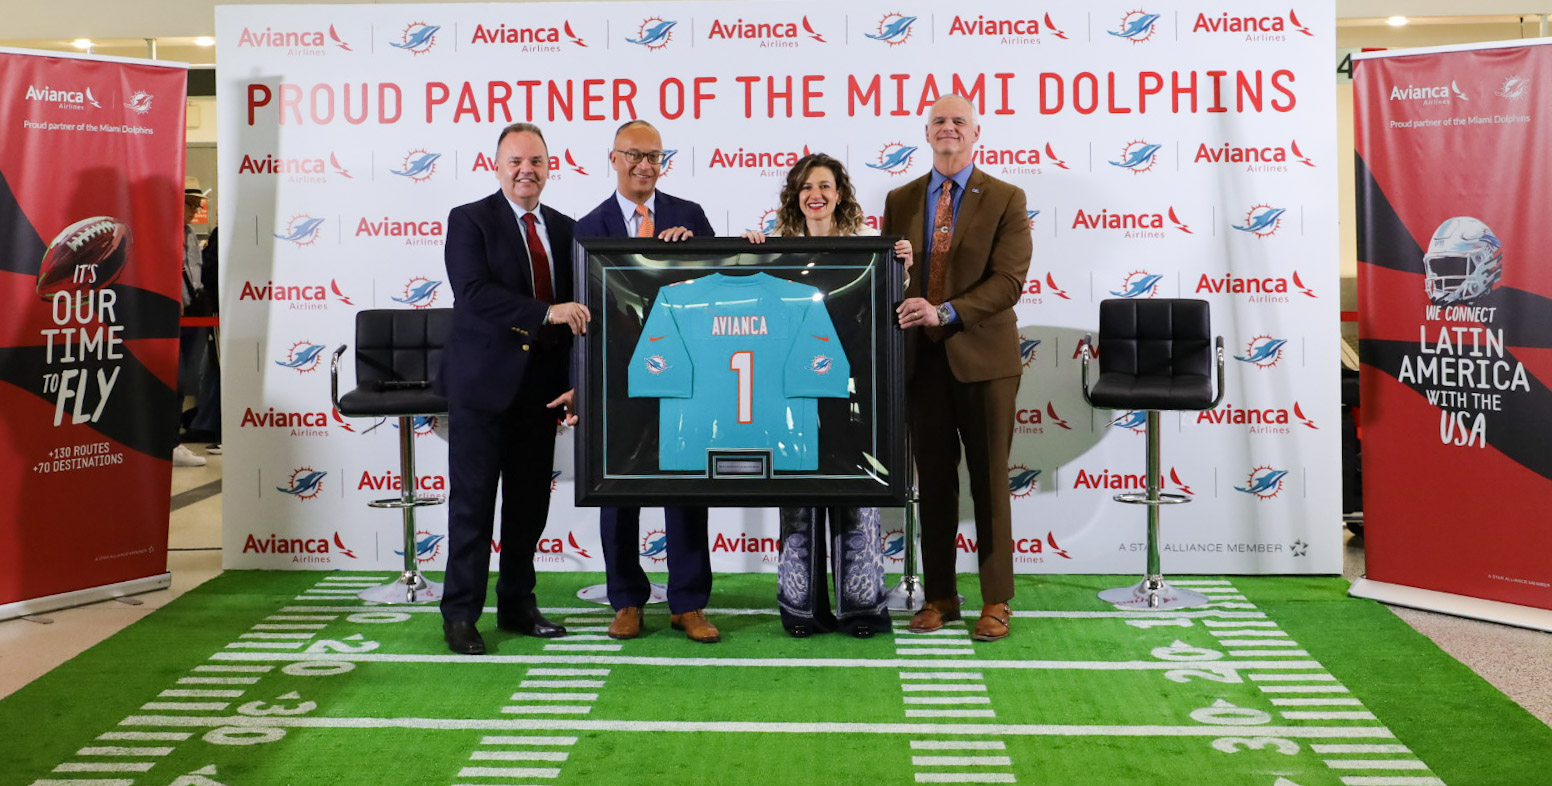 Avianca Airlines Miami Dolphins